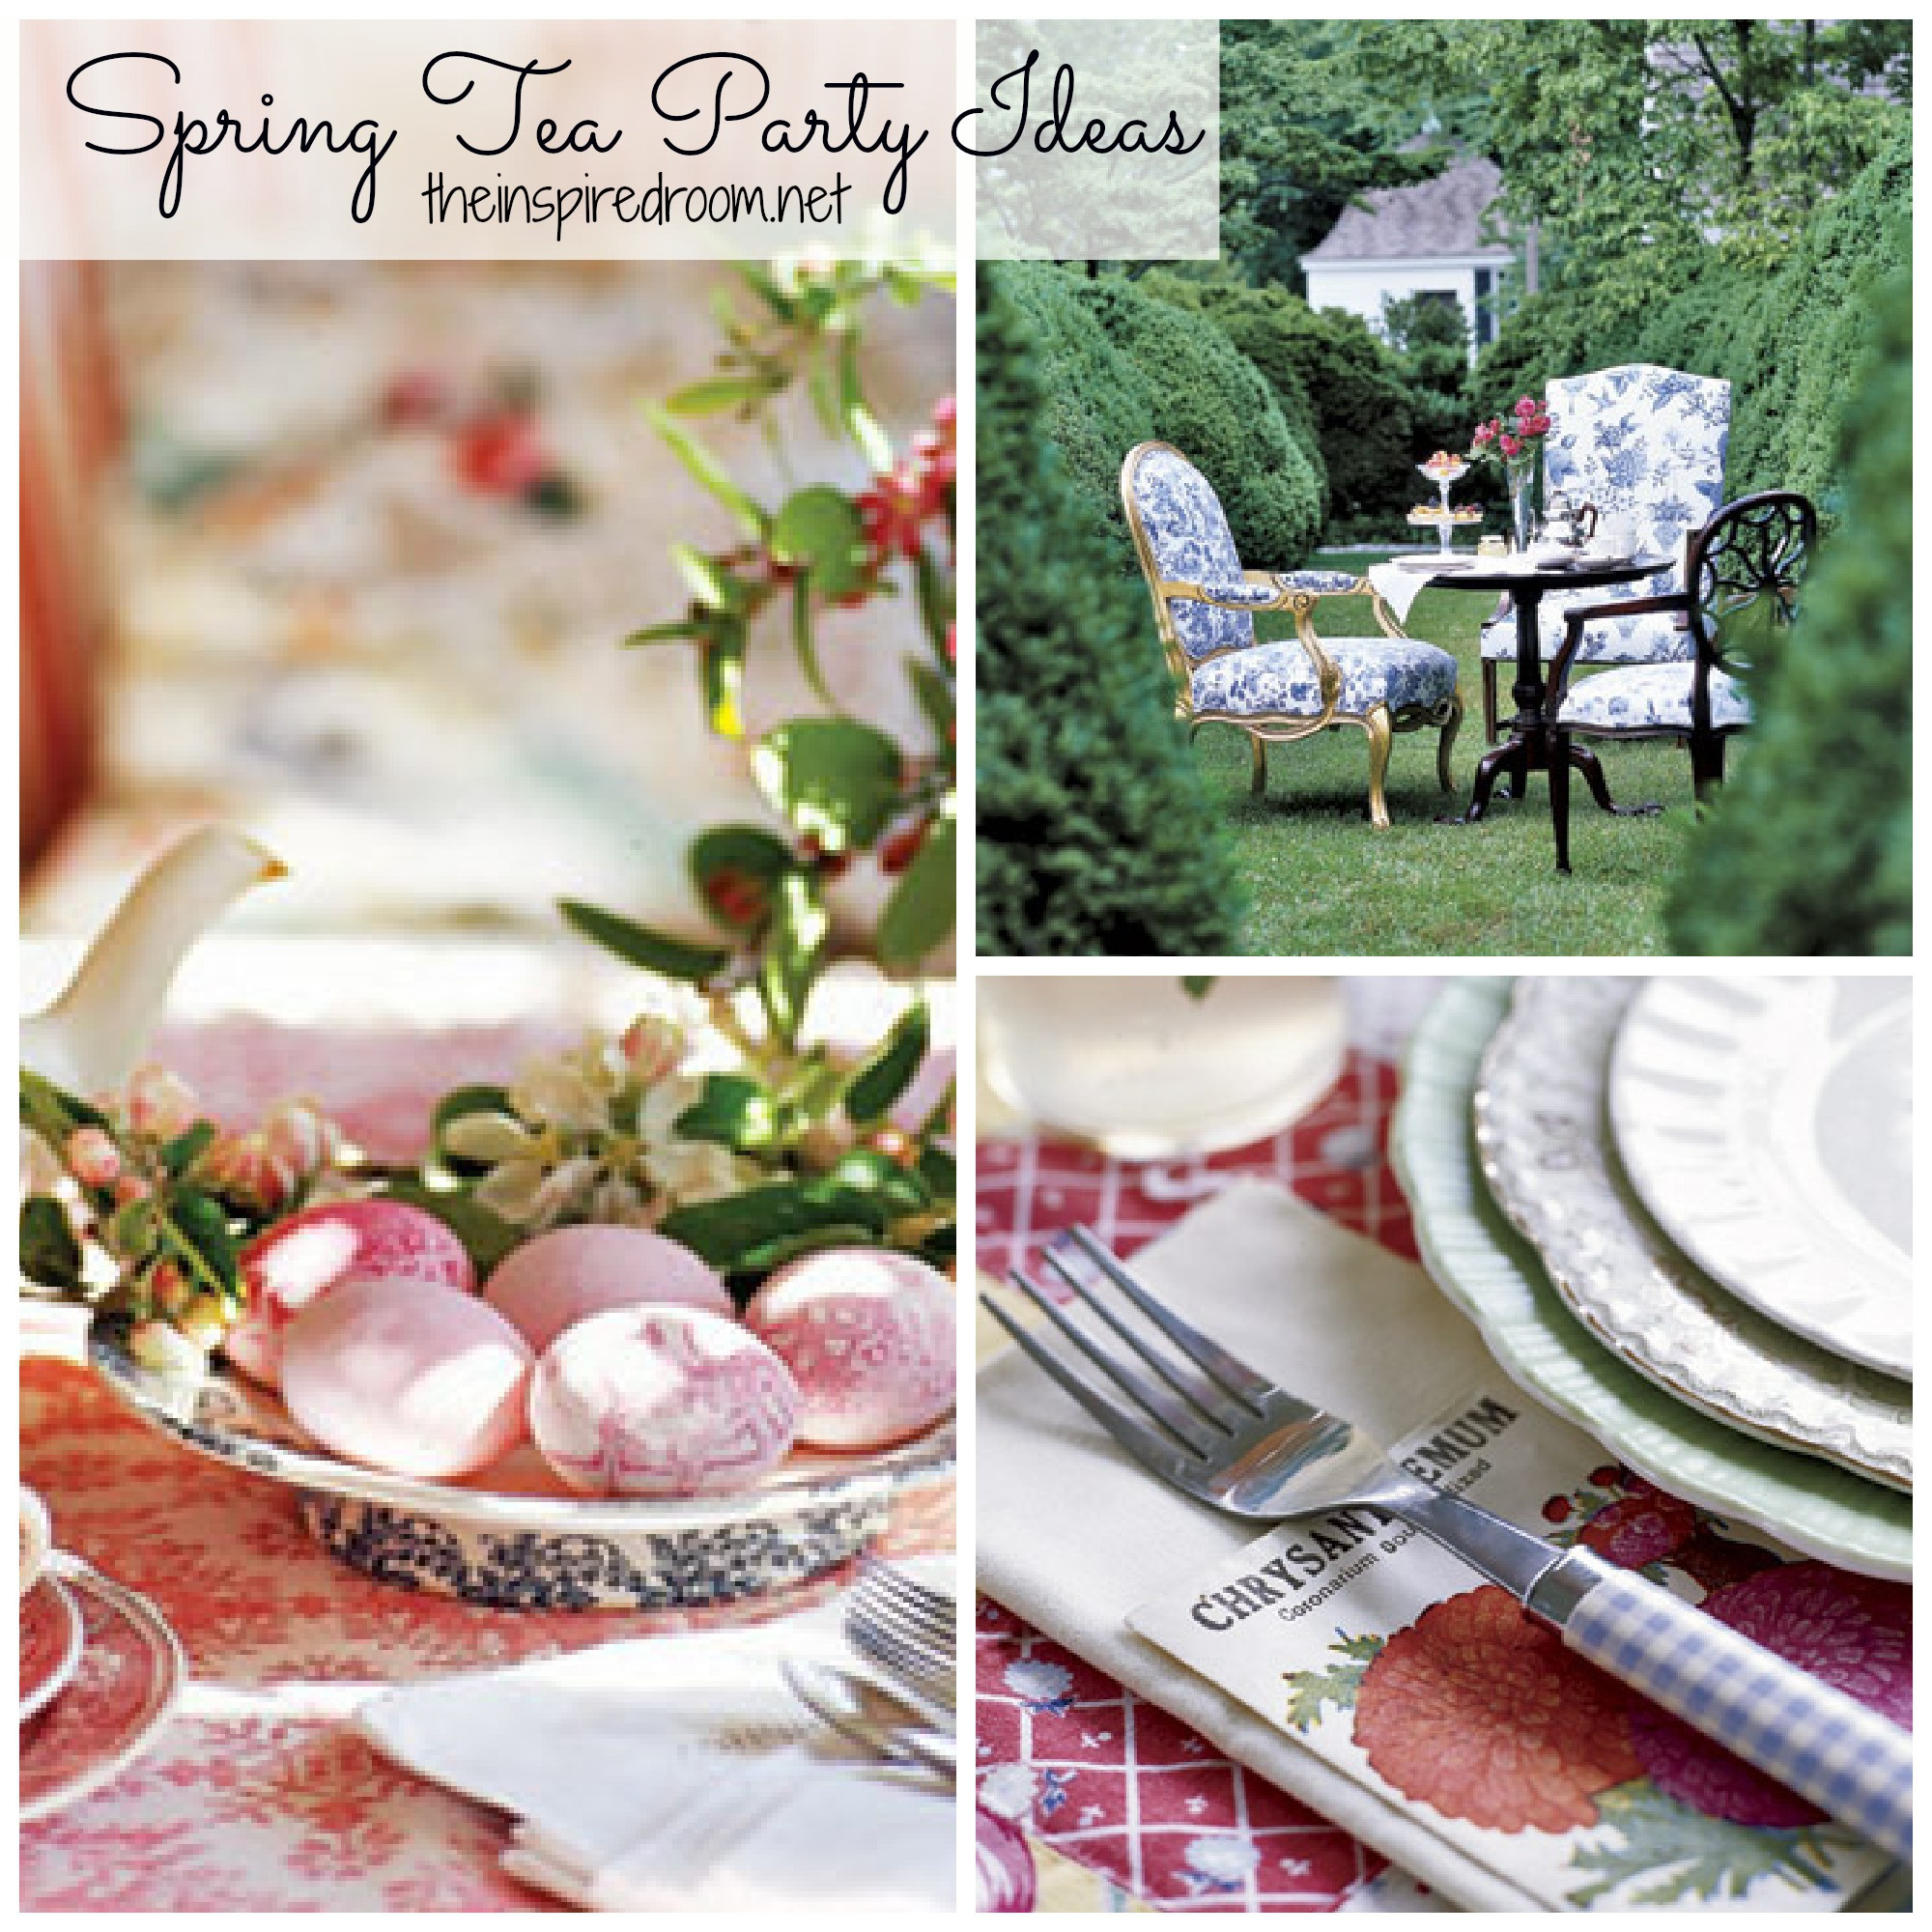 Spring Tea Party Ideas
 Spring Time Tea Parties Sweet Ideas  The Inspired Room